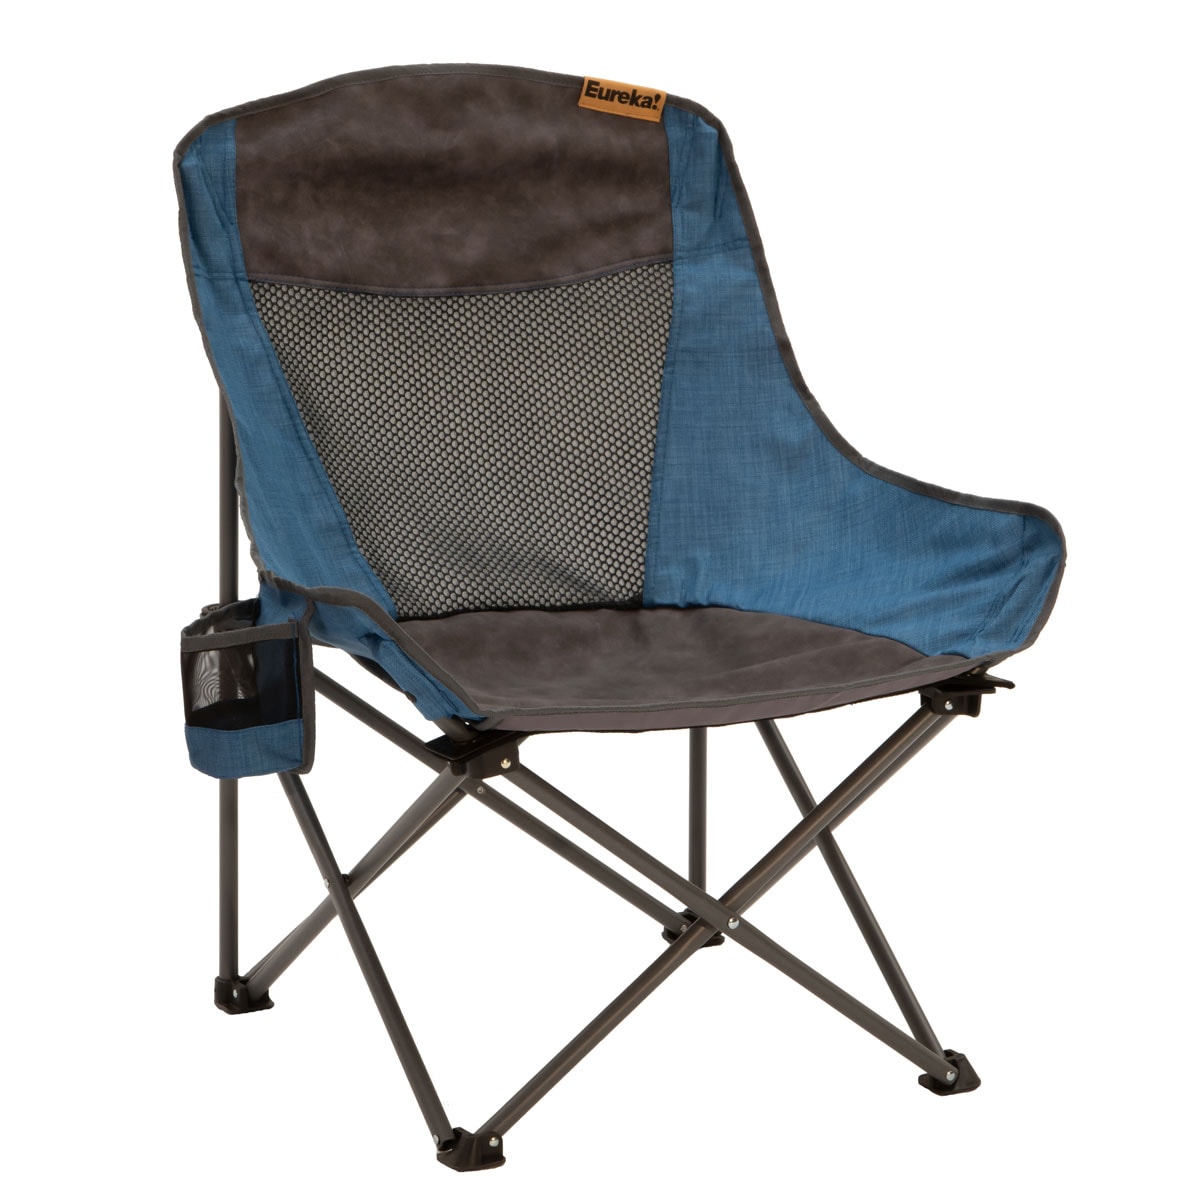 The Most Comfortable Outdoor Chair In 2021 - Effortless Outdoors